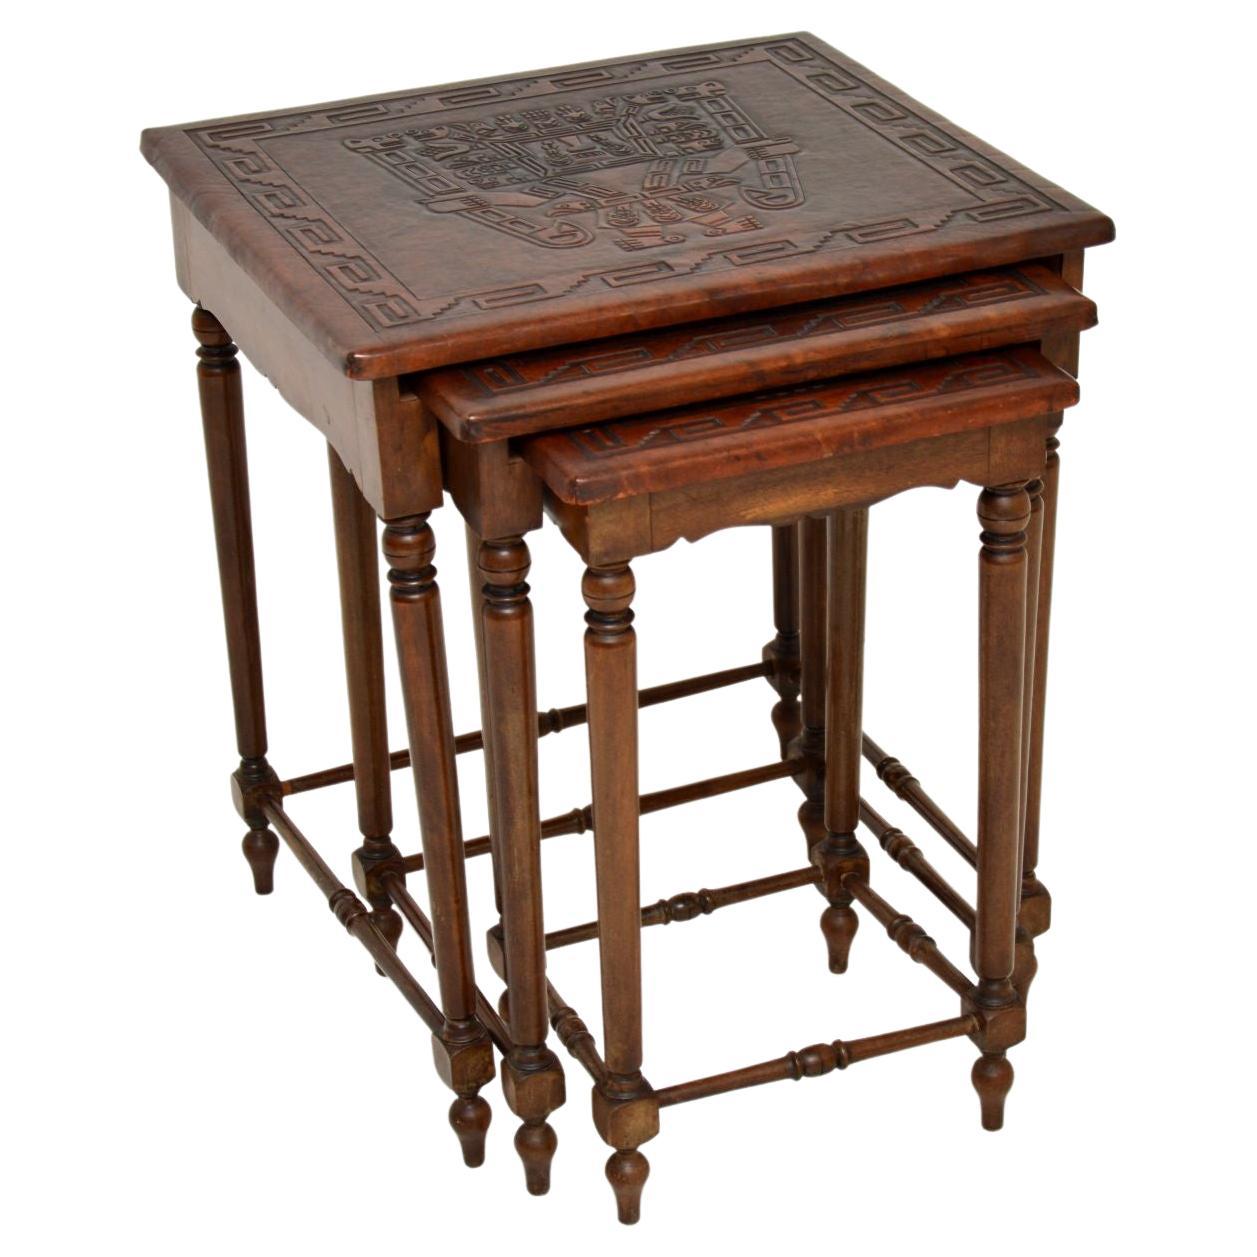 Antique Embossed Leather Top Nest of Tables For Sale